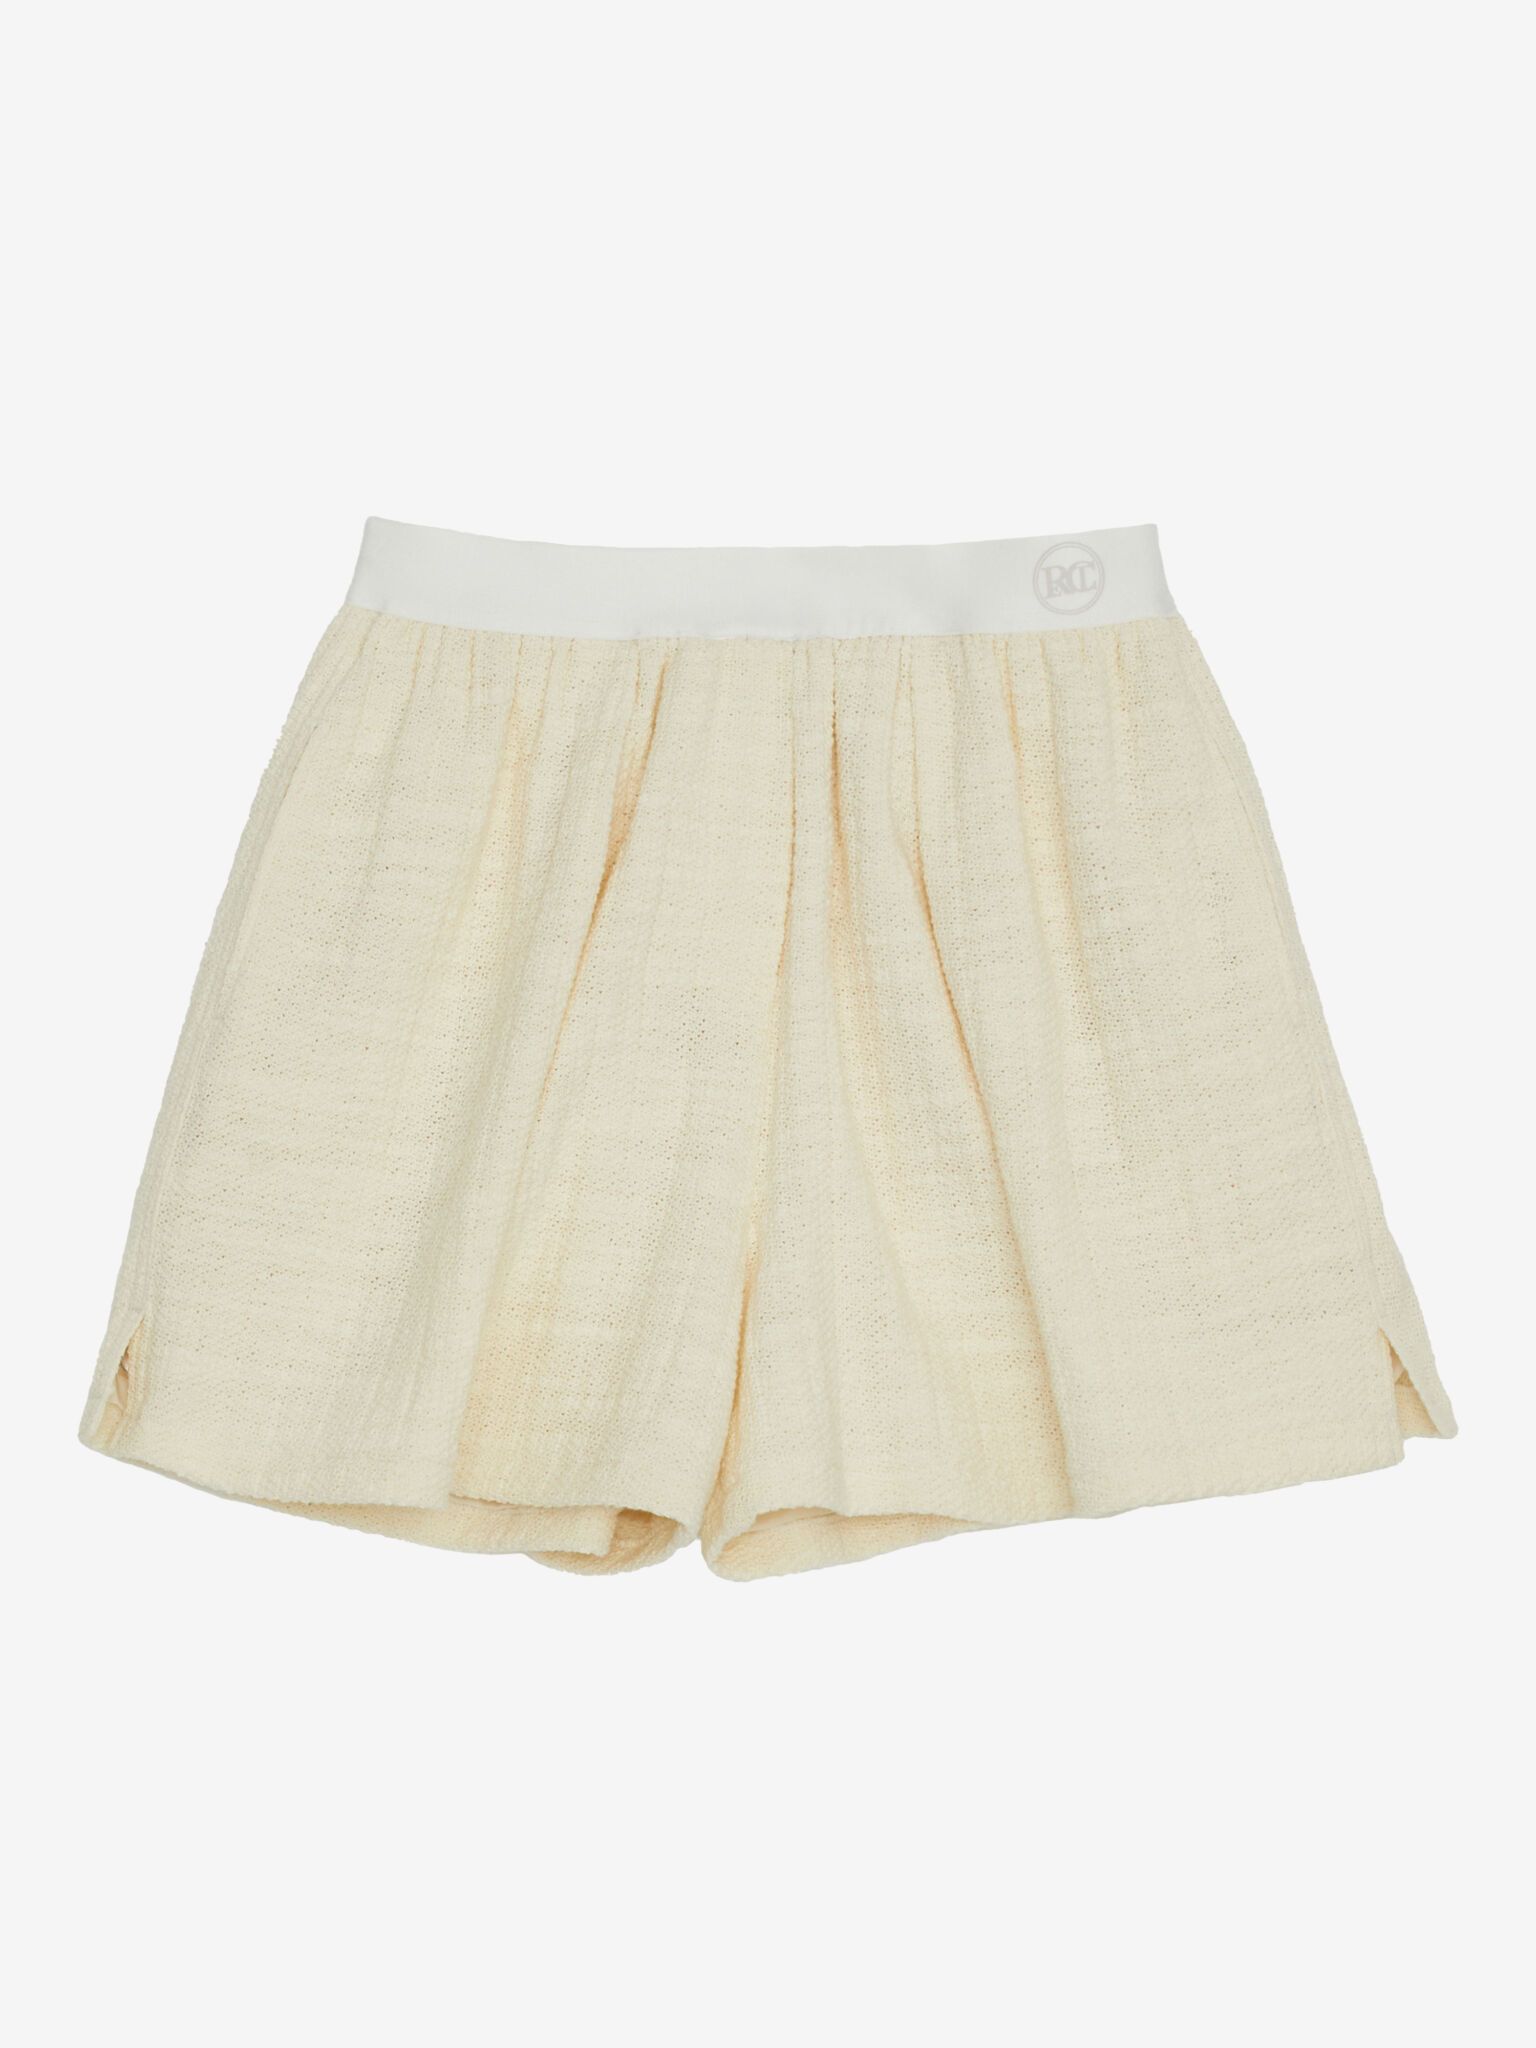 Oliver Recycle Organic Band Shorts - Recto - WO CLÉ